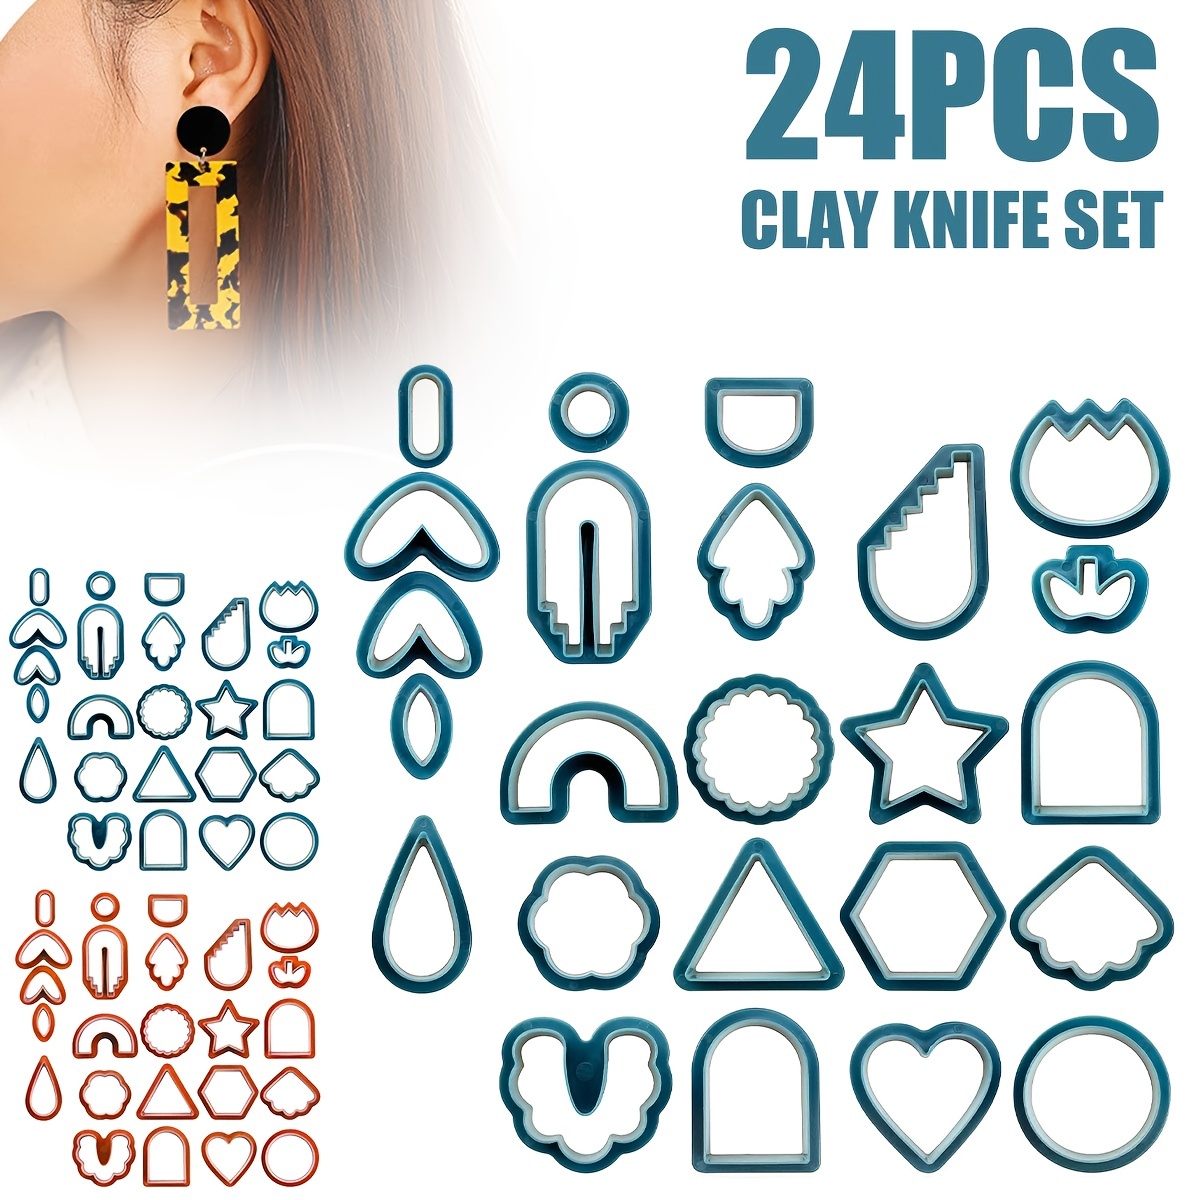 PTFJZ Polymer Clay Cutters for Earring Making - 160pcs Clay Tools Set with Earrings Accessories, 42+8pcs Different Shape Plastic Clay Molds Clay Cutters